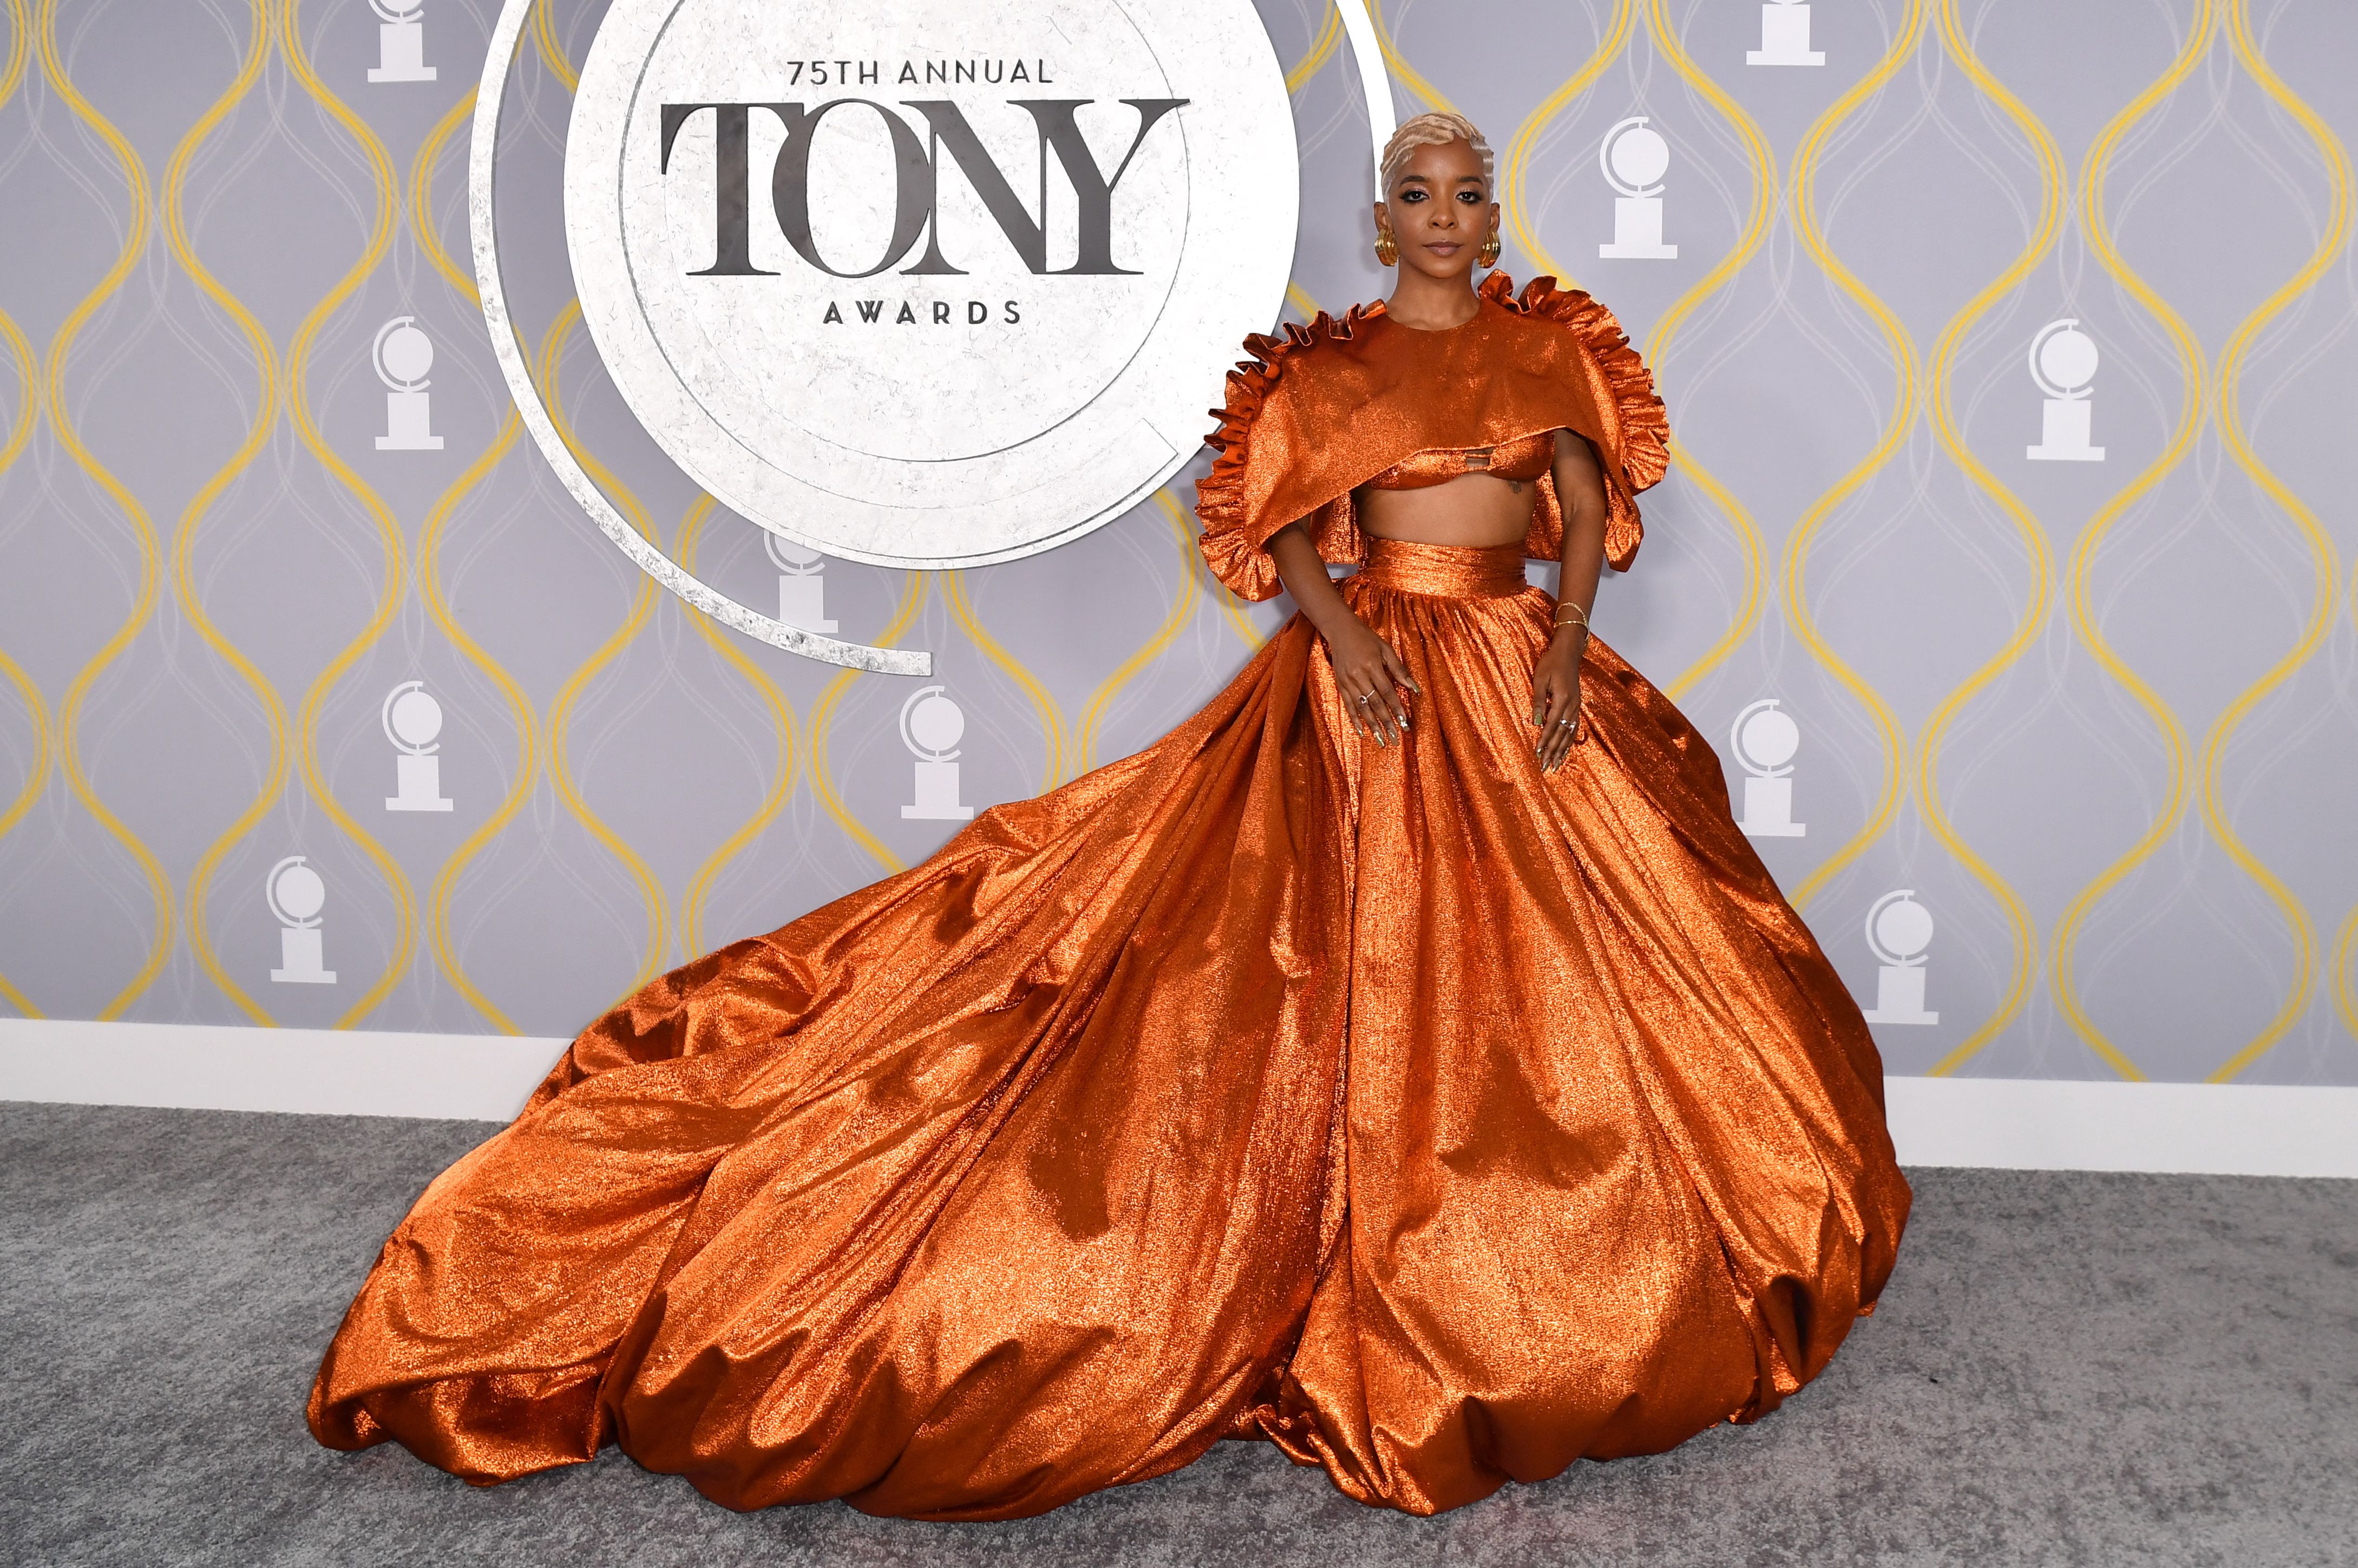 The Best Dressed Stars at the 2022 Tony Awards Red Carpet